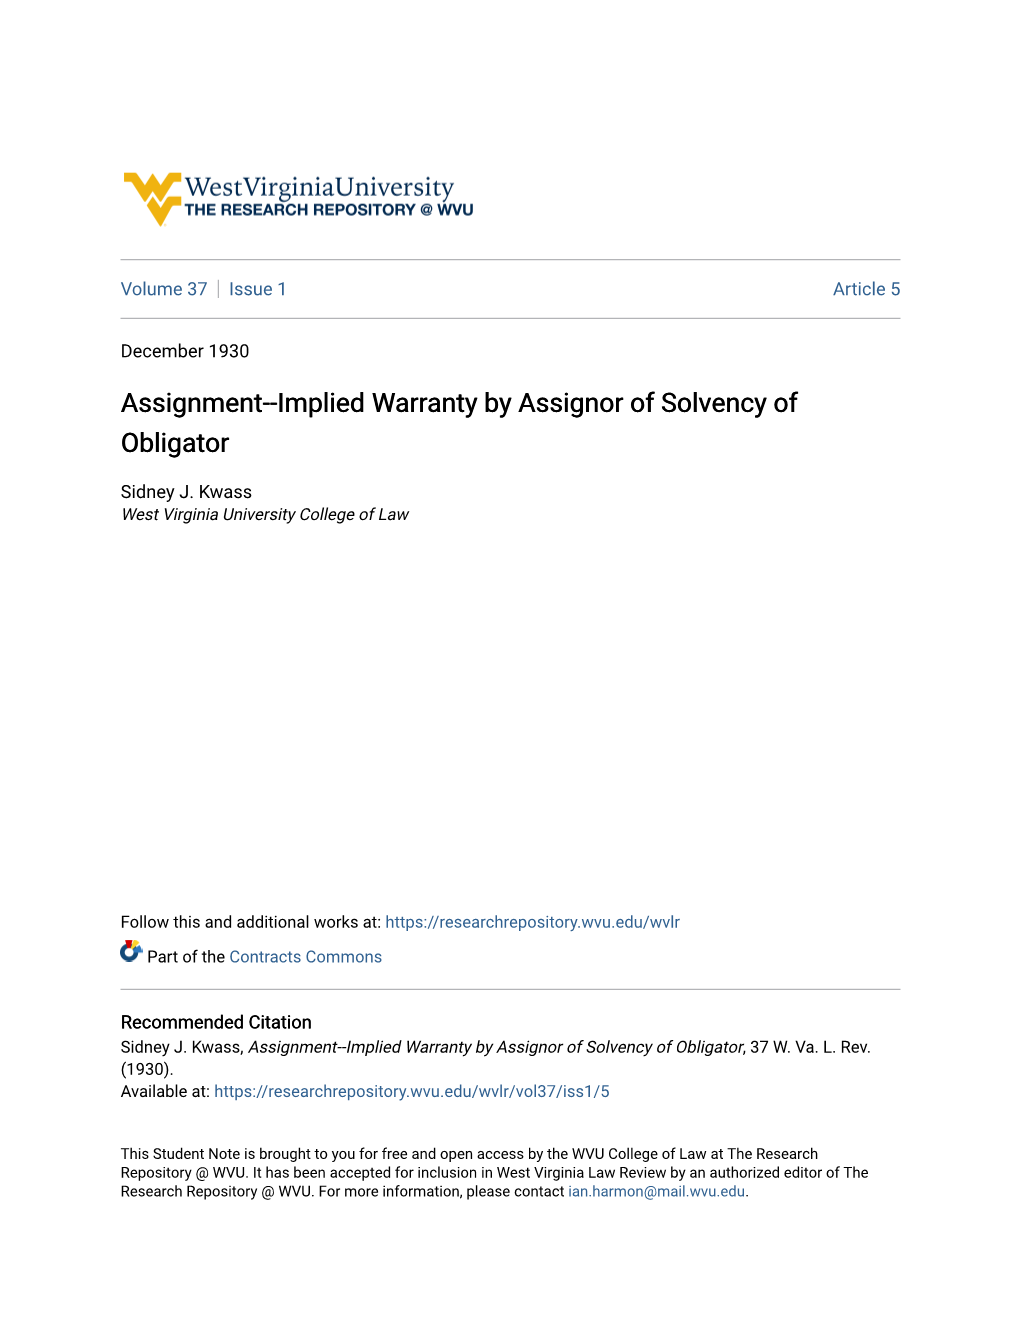 Assignment--Implied Warranty by Assignor of Solvency of Obligator